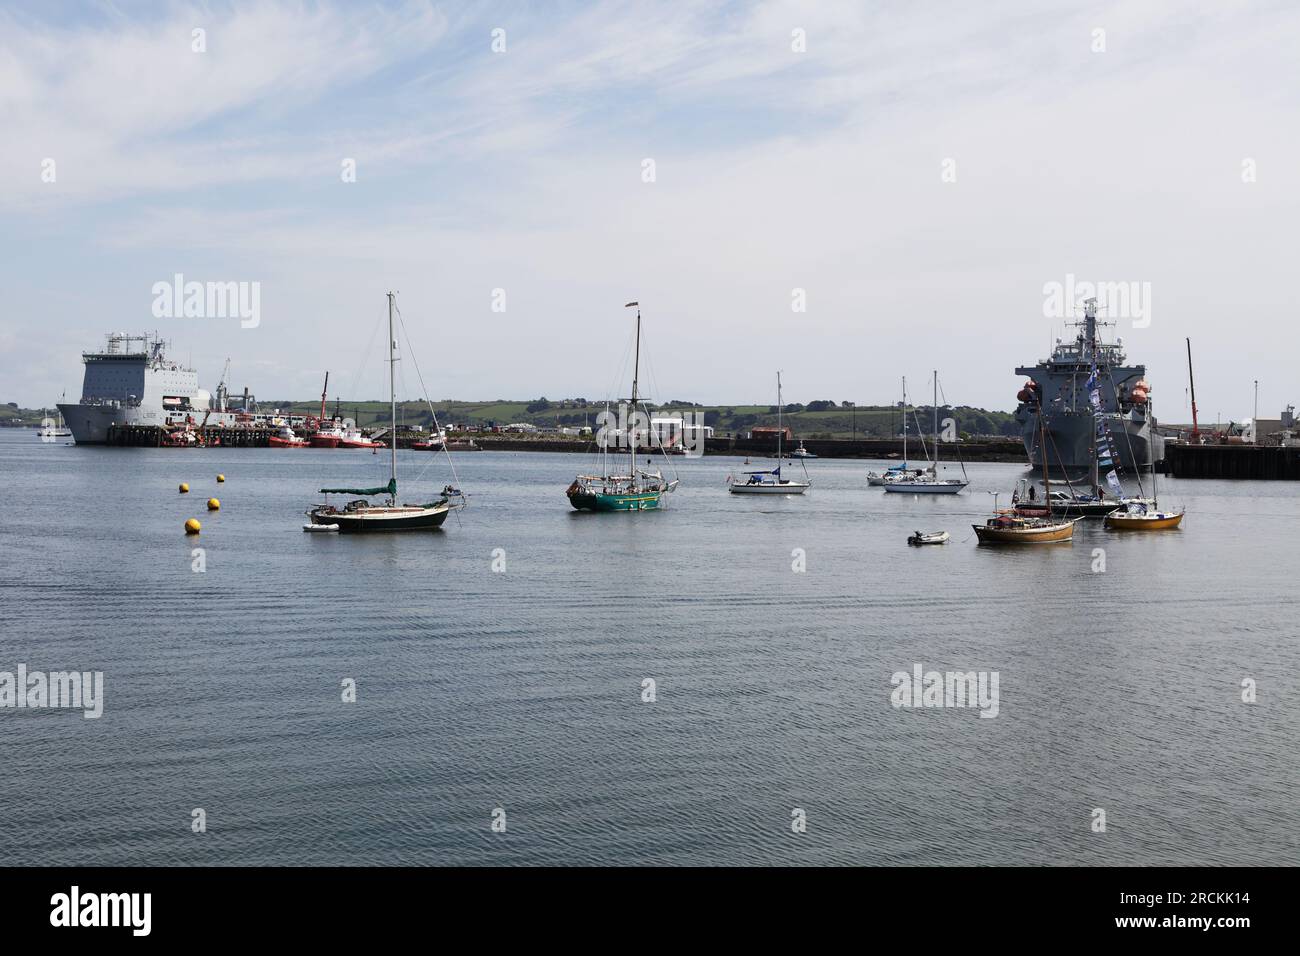 Royal Navy ships in Falmouth, the ship to the left is in for a major refit and has been in port some time. Stock Photo